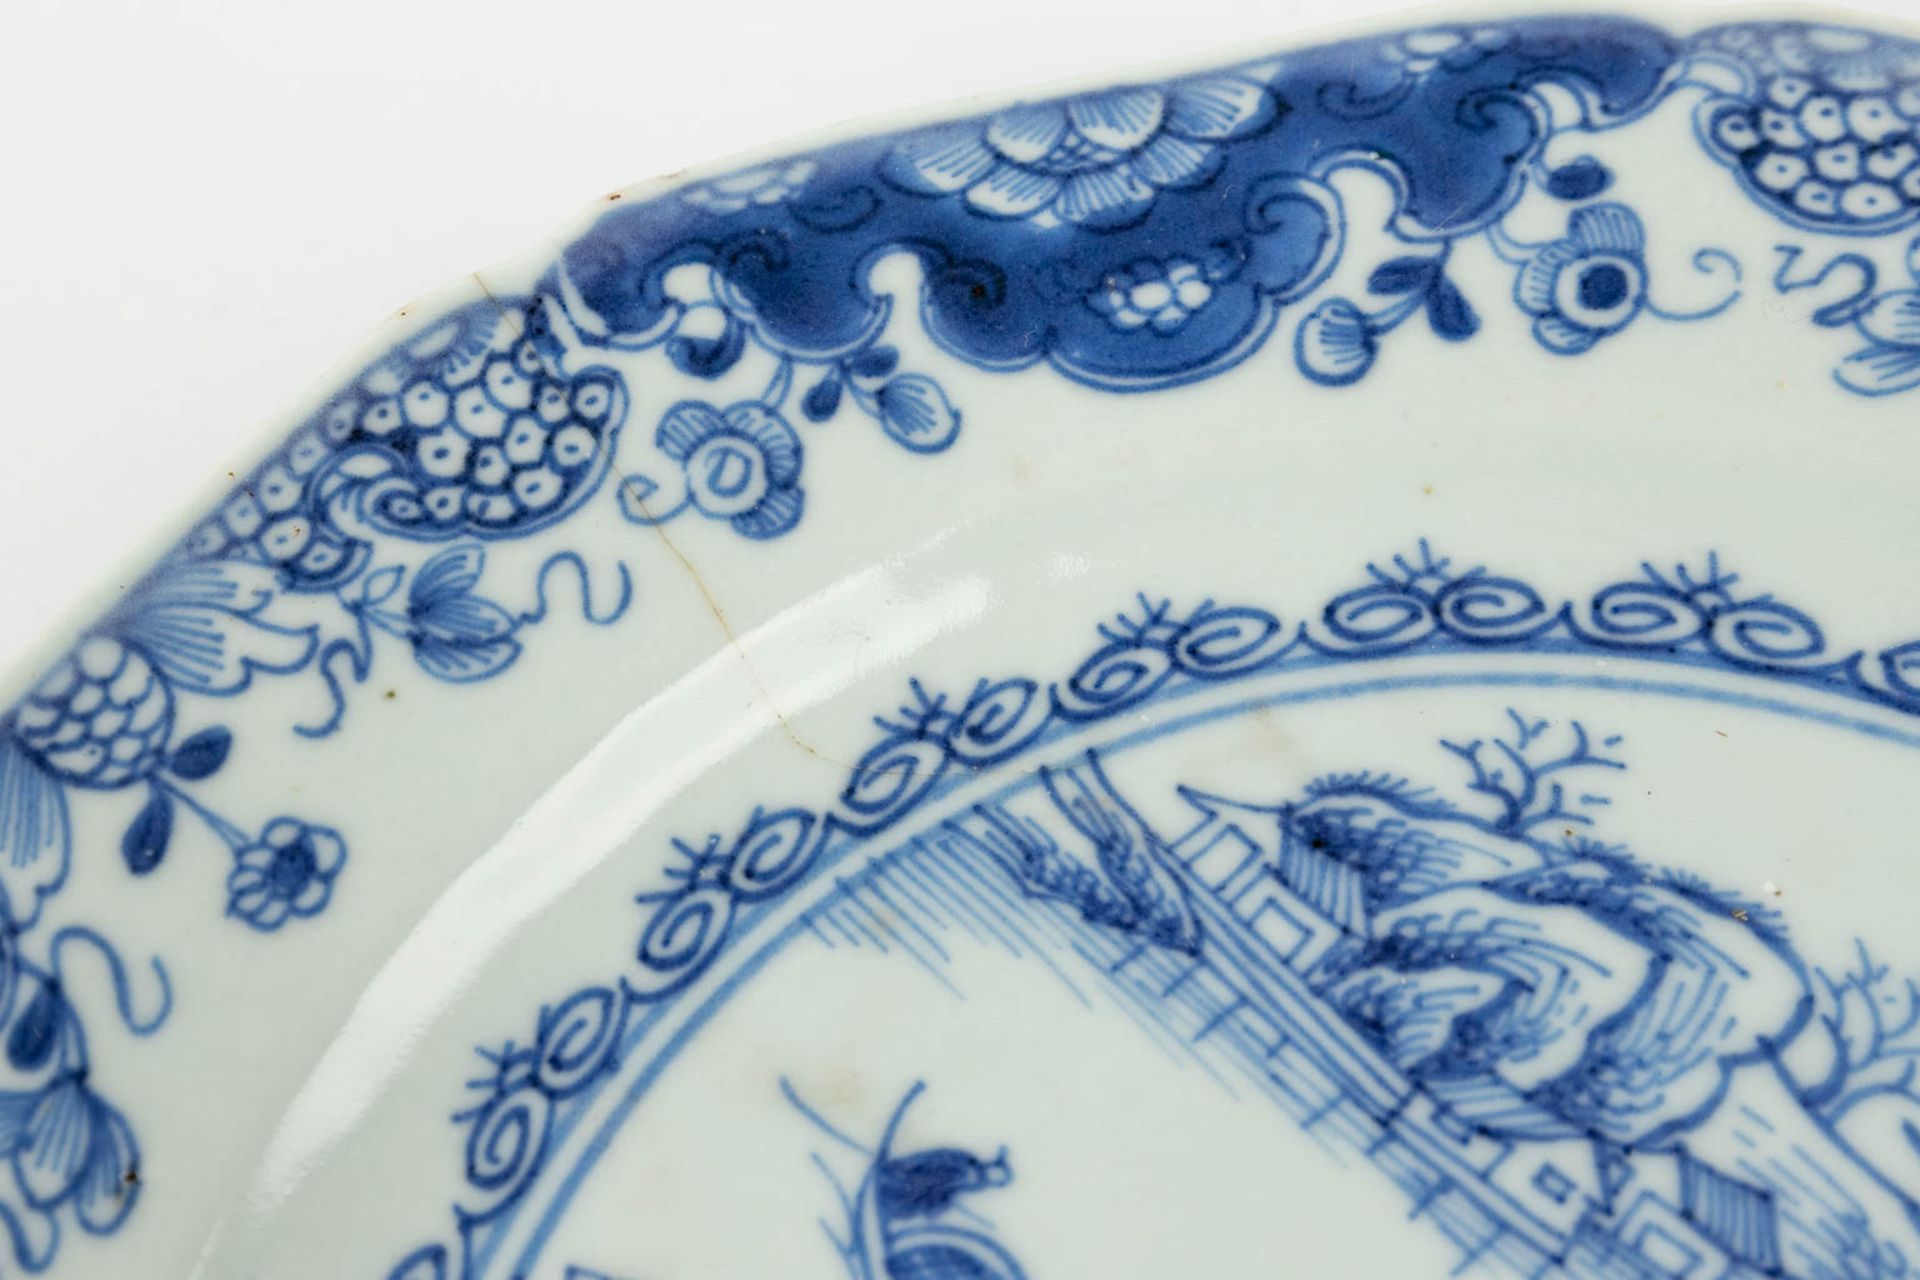 A collection of 7 Chinese plates and platters made of blue-white porcelain. (34 x 40,5 cm) - Image 12 of 23